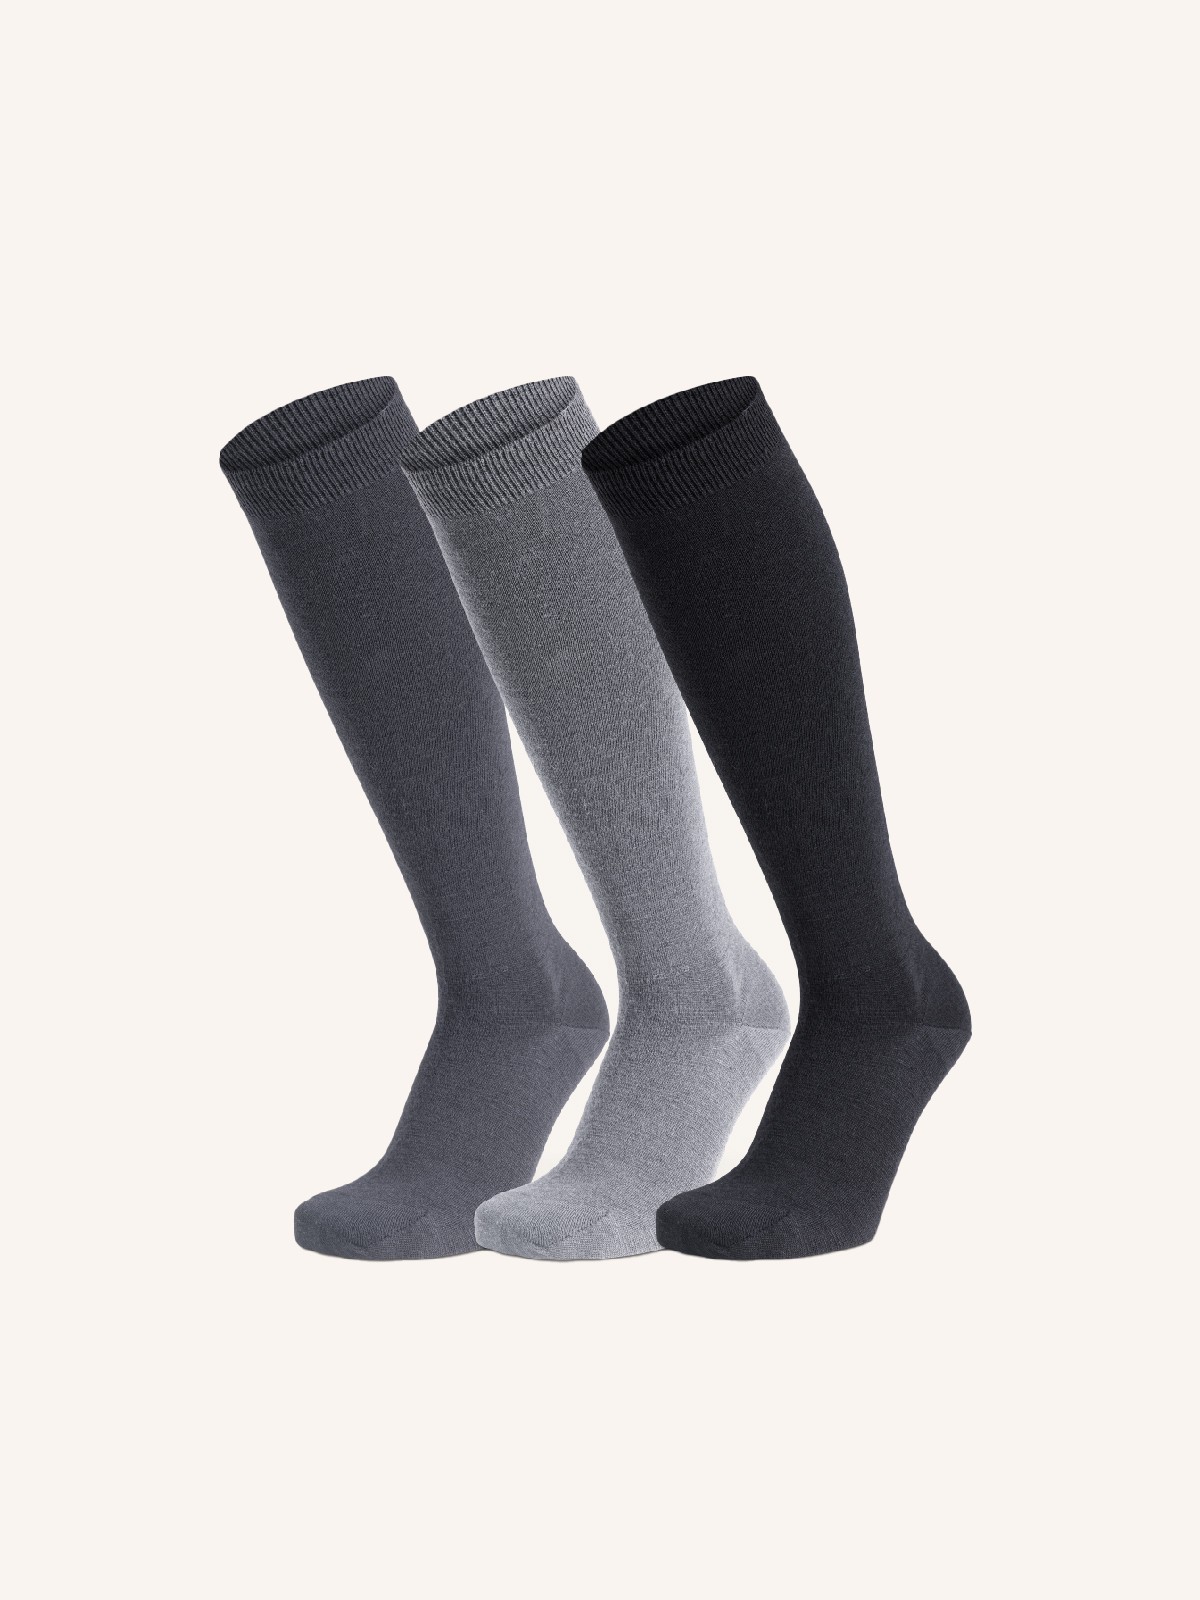 Long Wool Socks for Women | Plain Color | Pack of 3 Pairs | Cool Wool DL